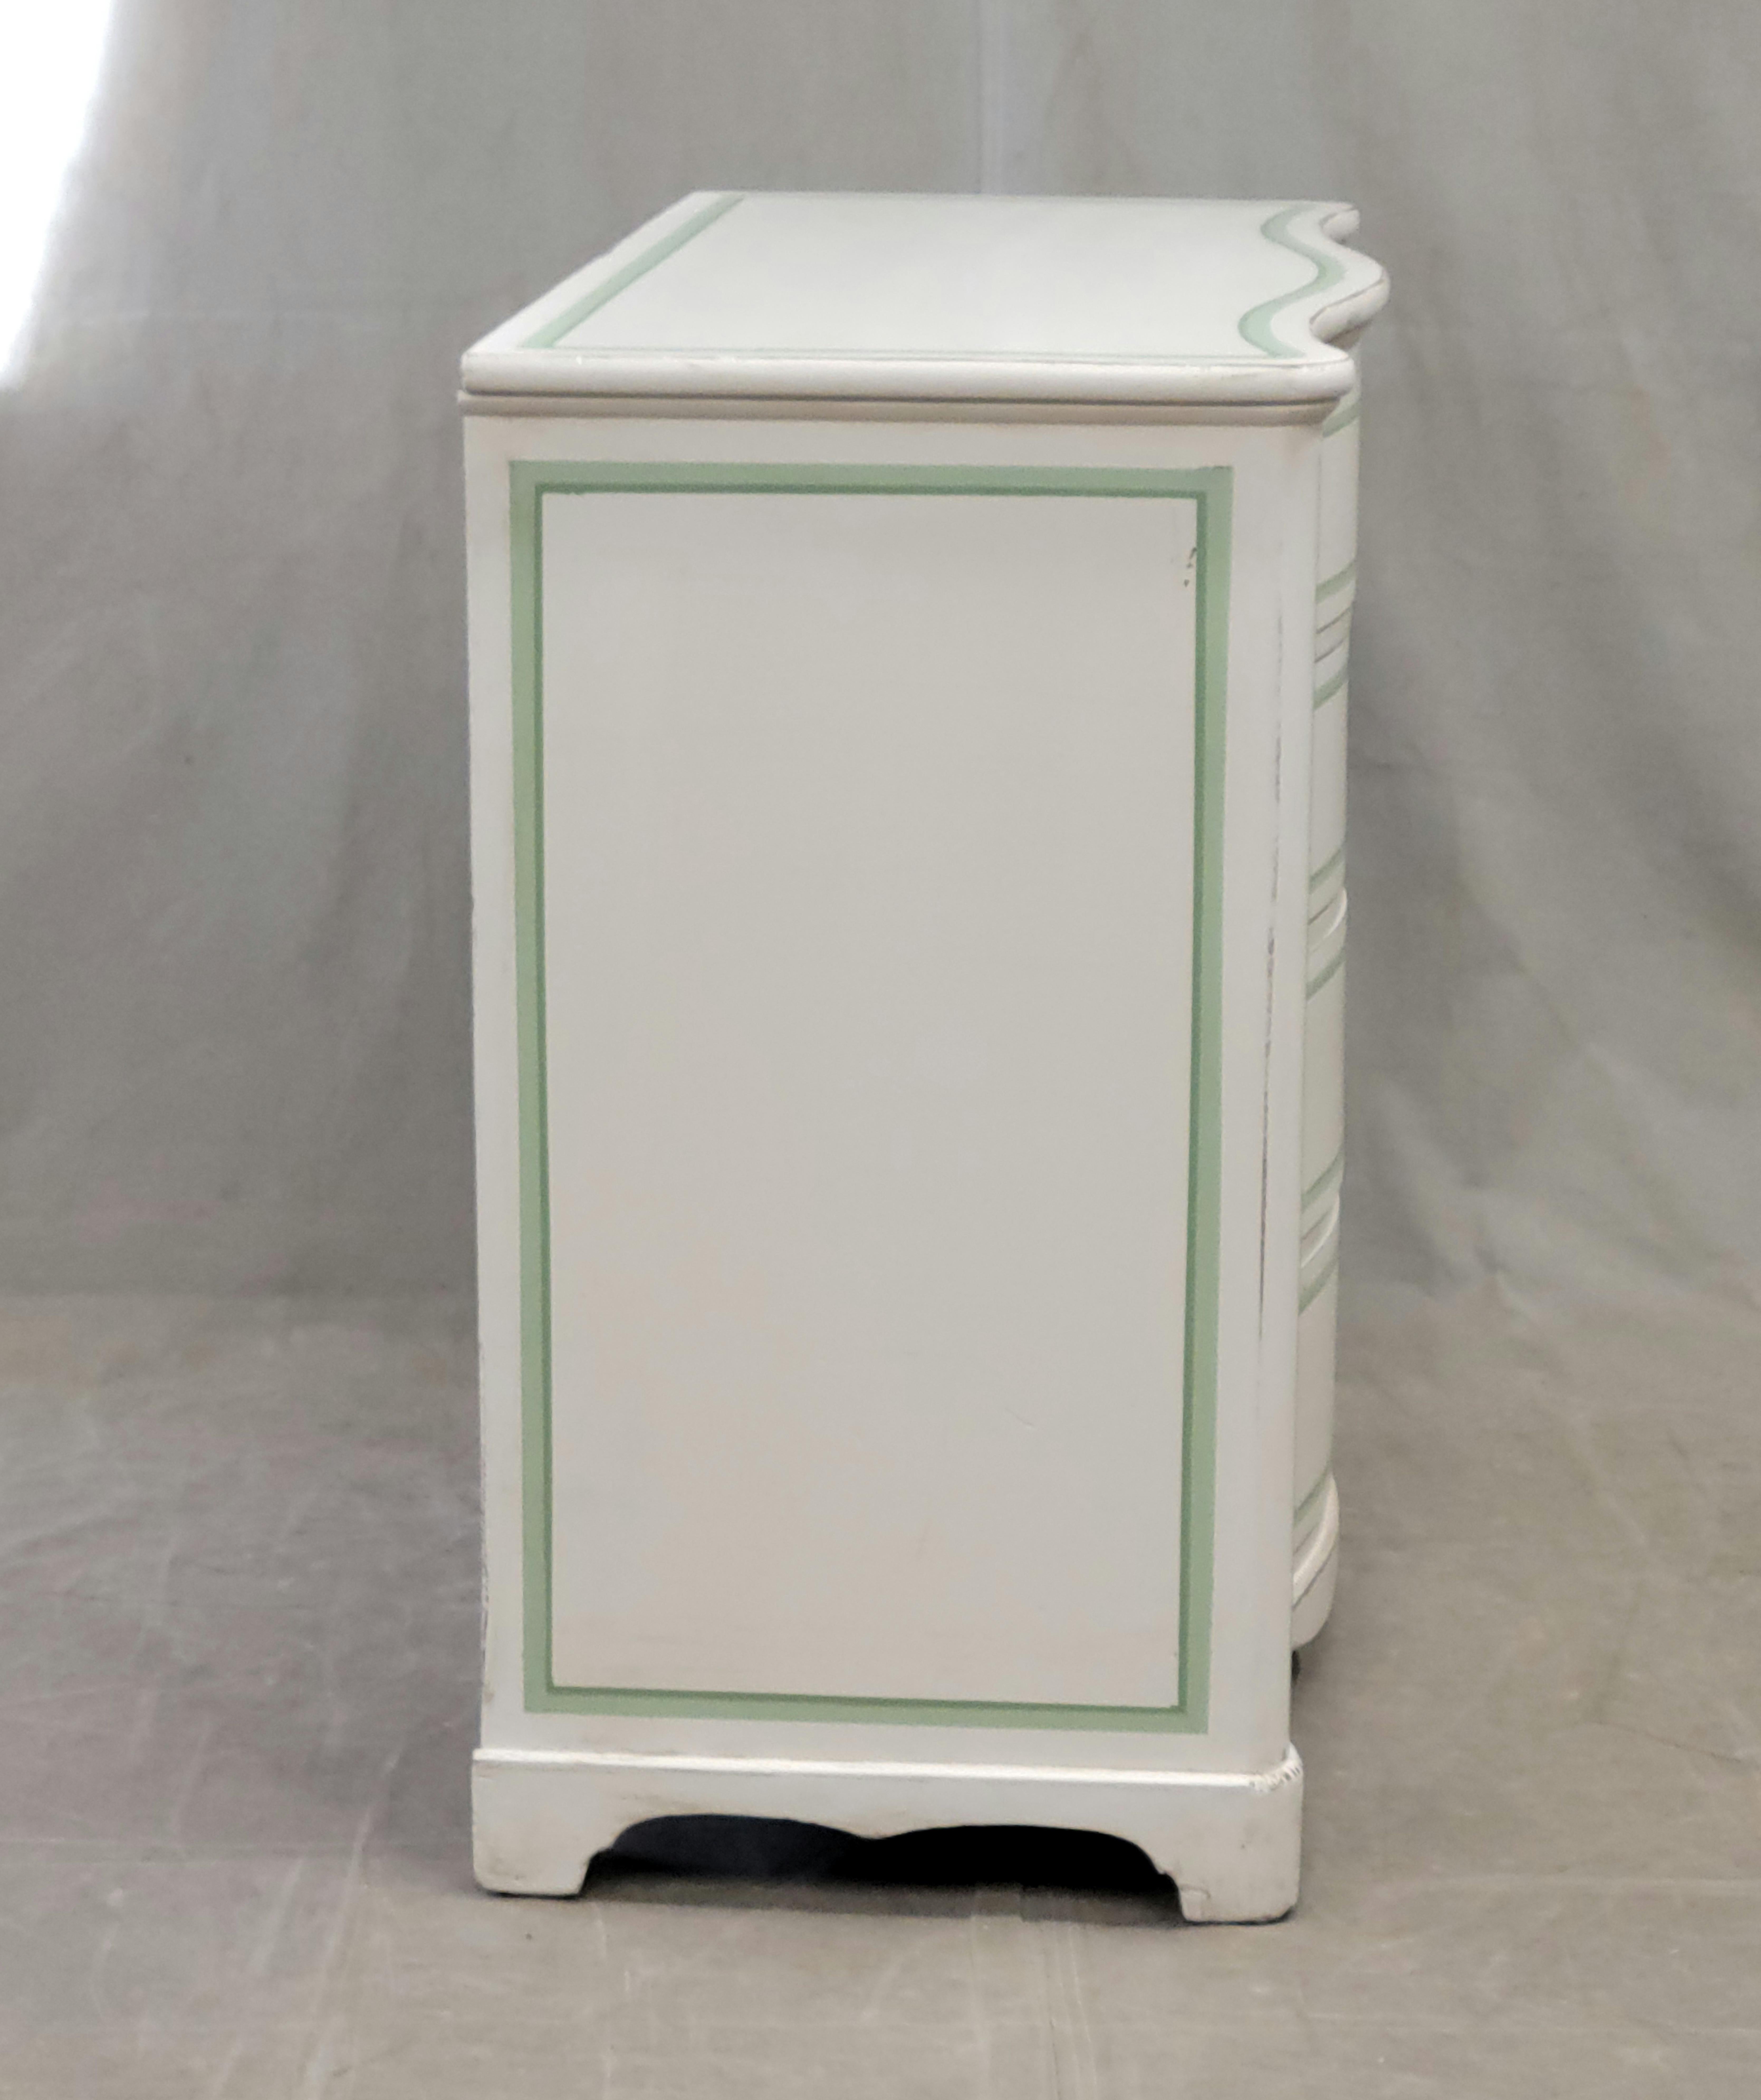 Antique Serpentine Front Dresser Painted White With Green French Line Motif For Sale 1